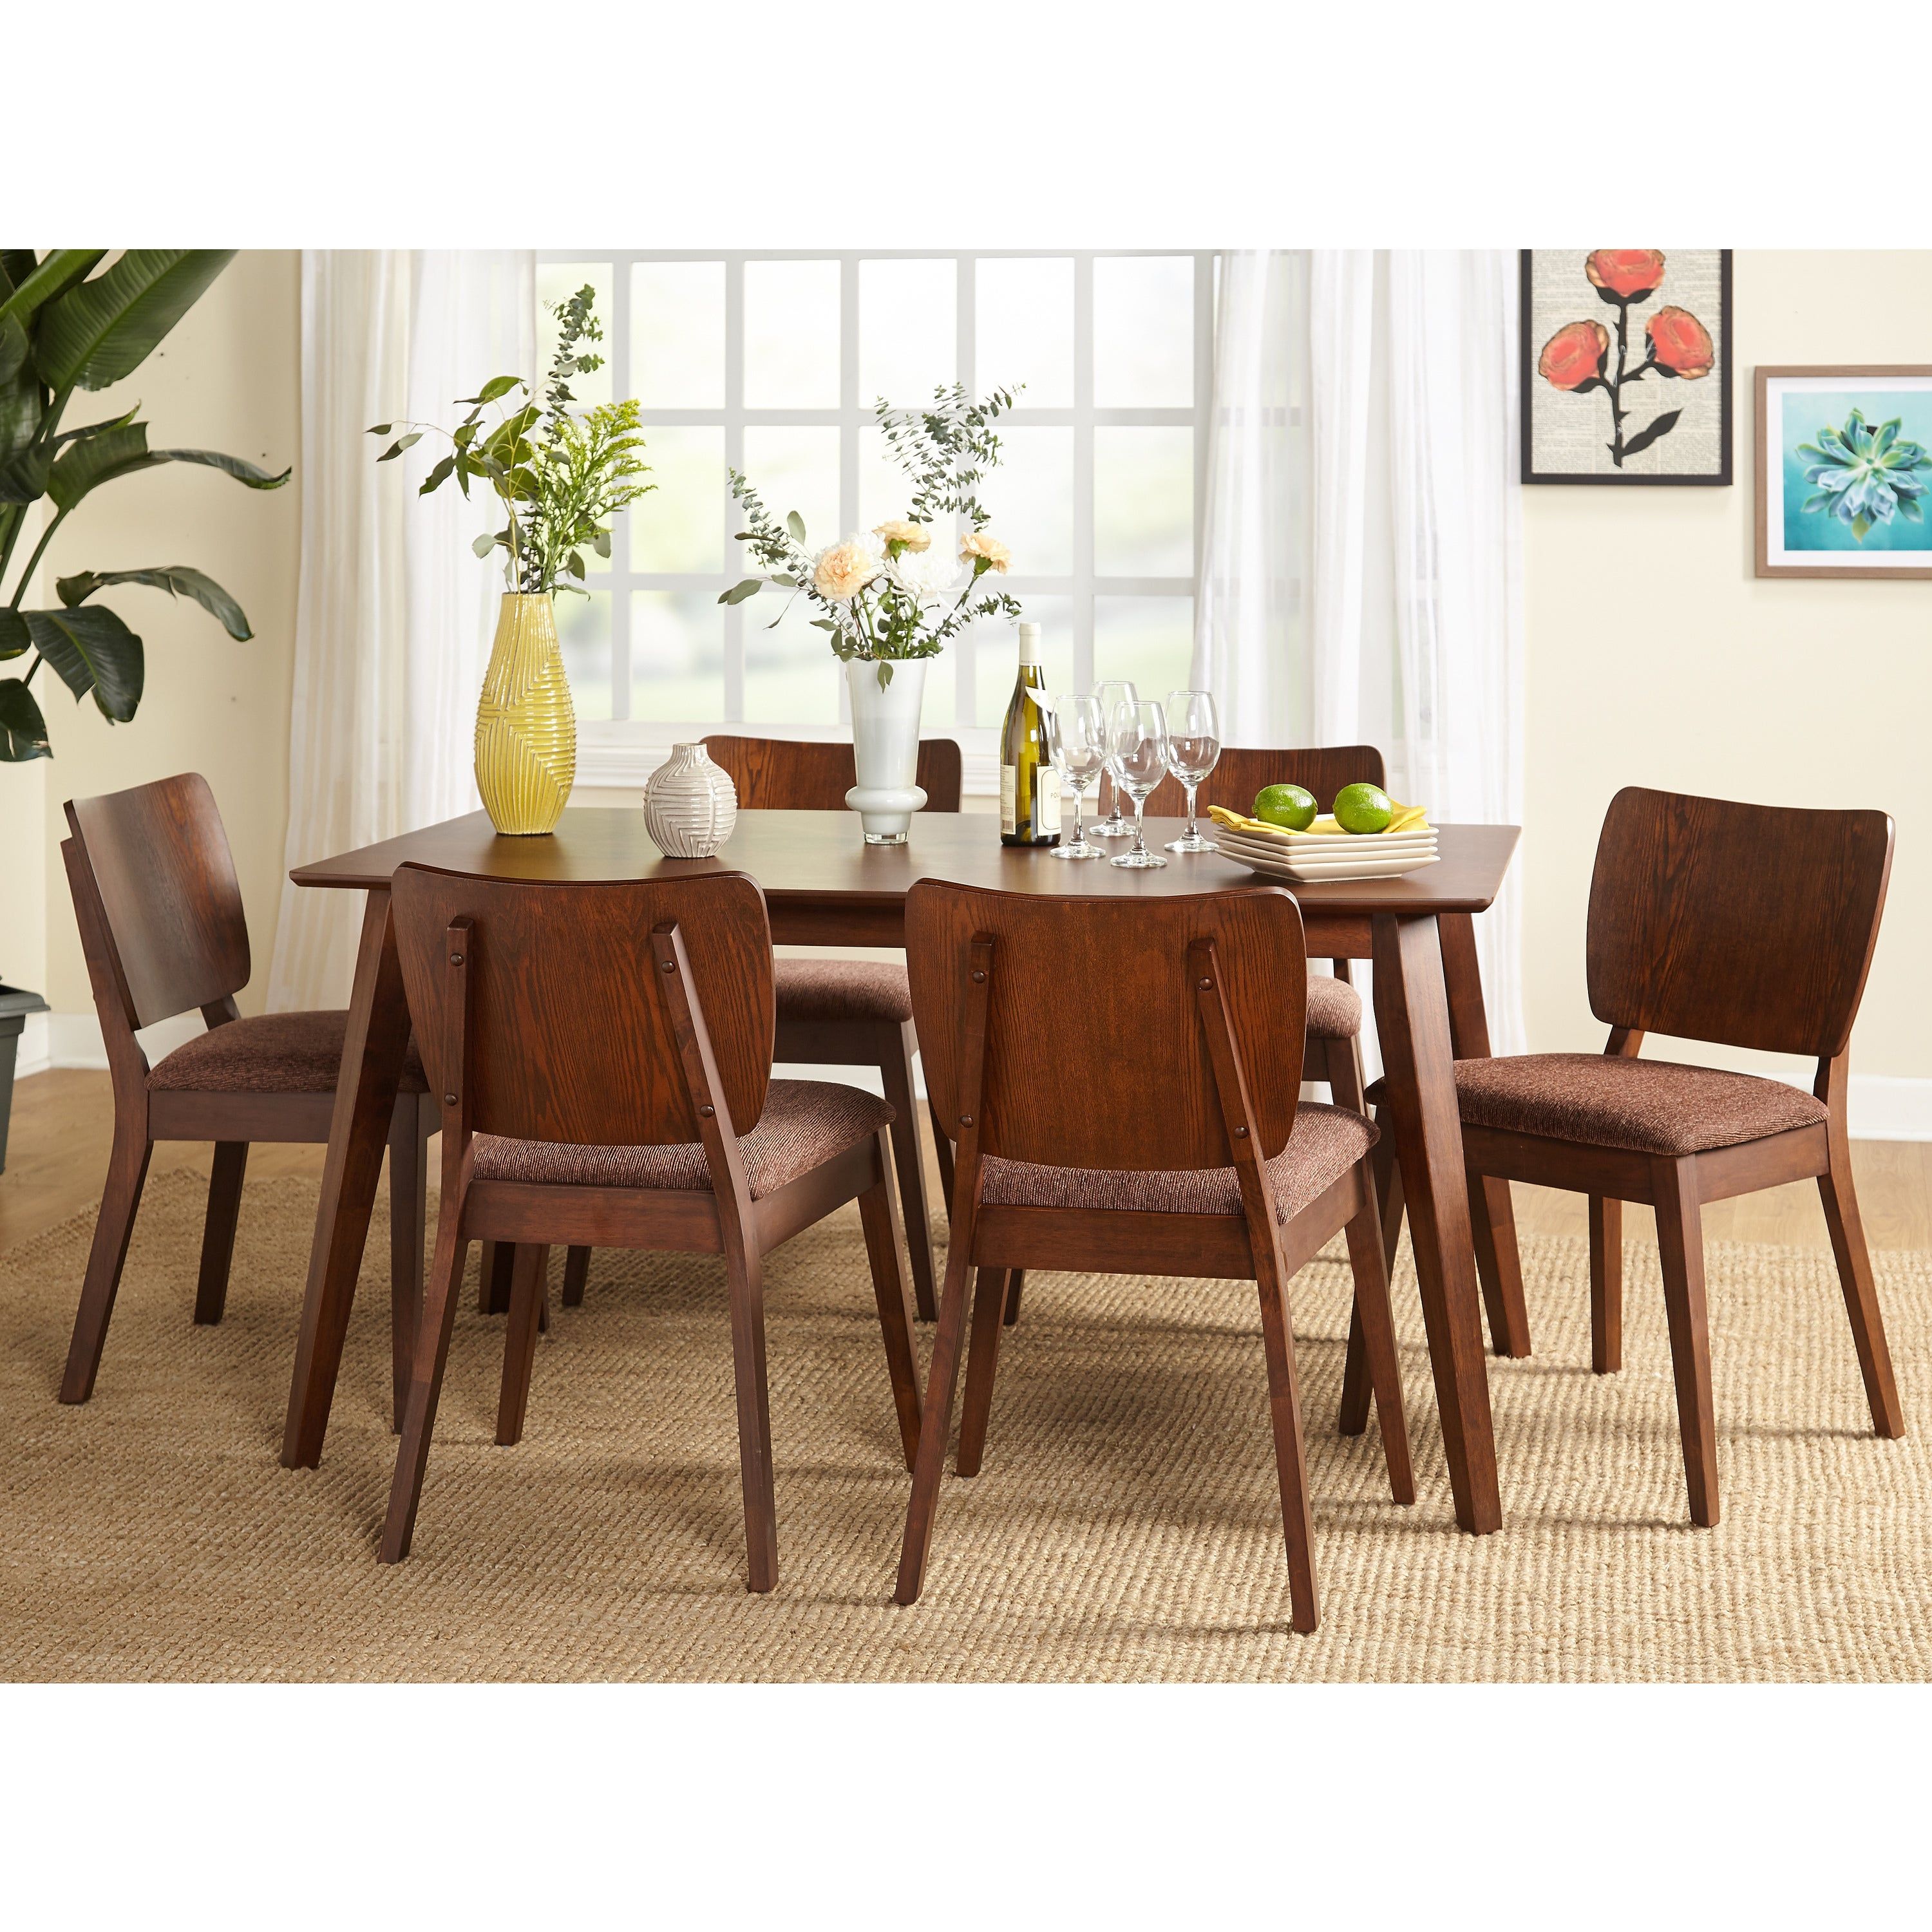 Famous Buy 5 Piece Sets Kitchen & Dining Room Sets Online At Overstock Regarding West Hill Family Table 3 Piece Dining Sets (View 8 of 20)